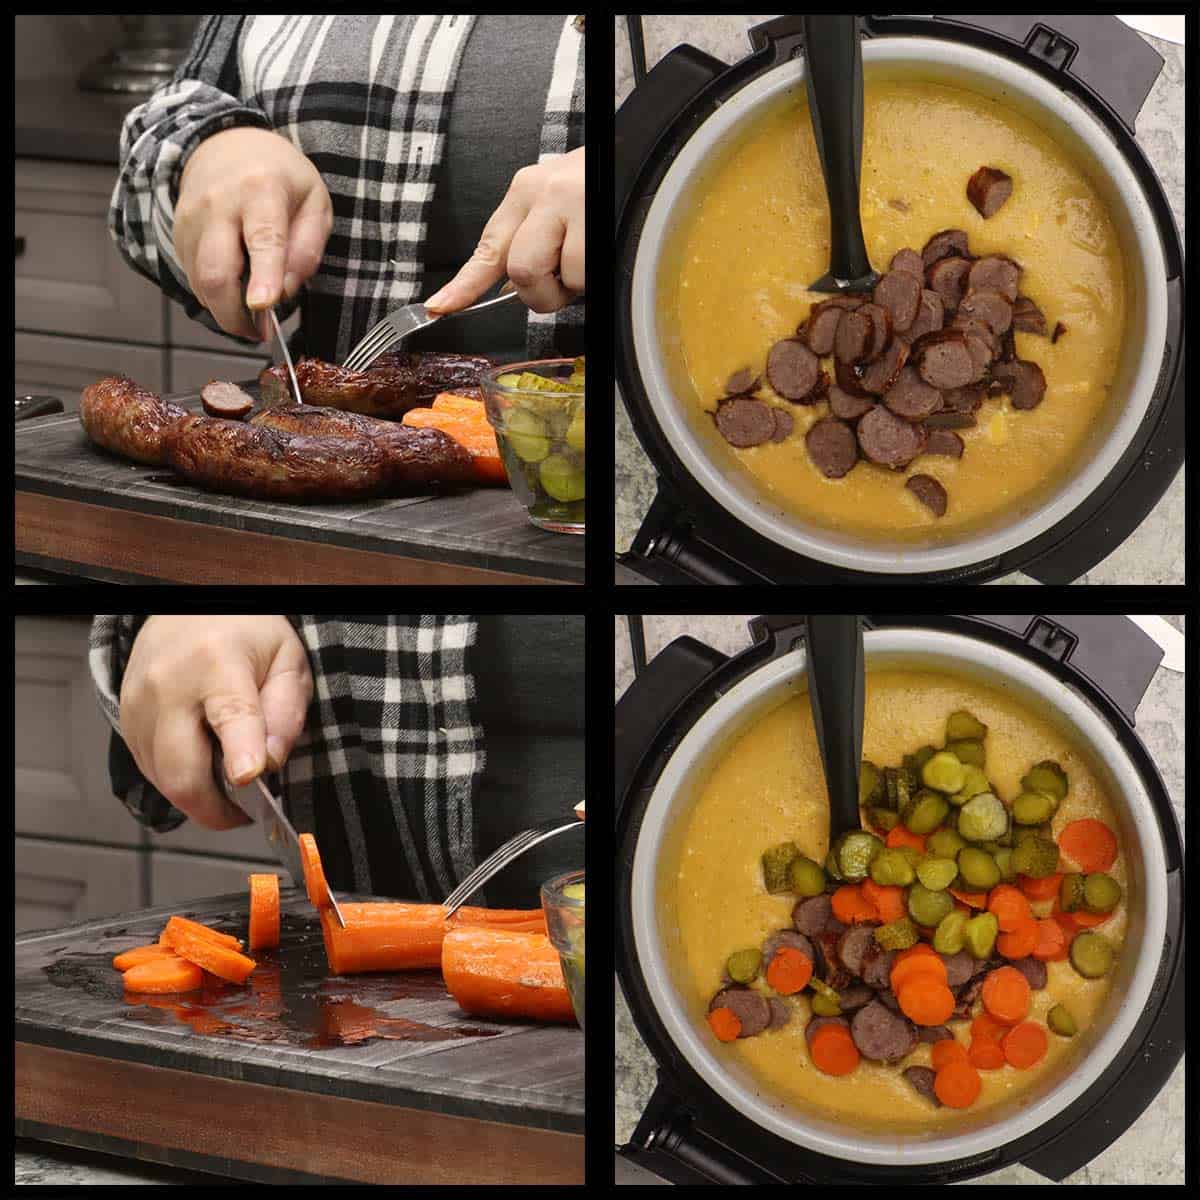 slicing carrots and sausage and adding to the soup.